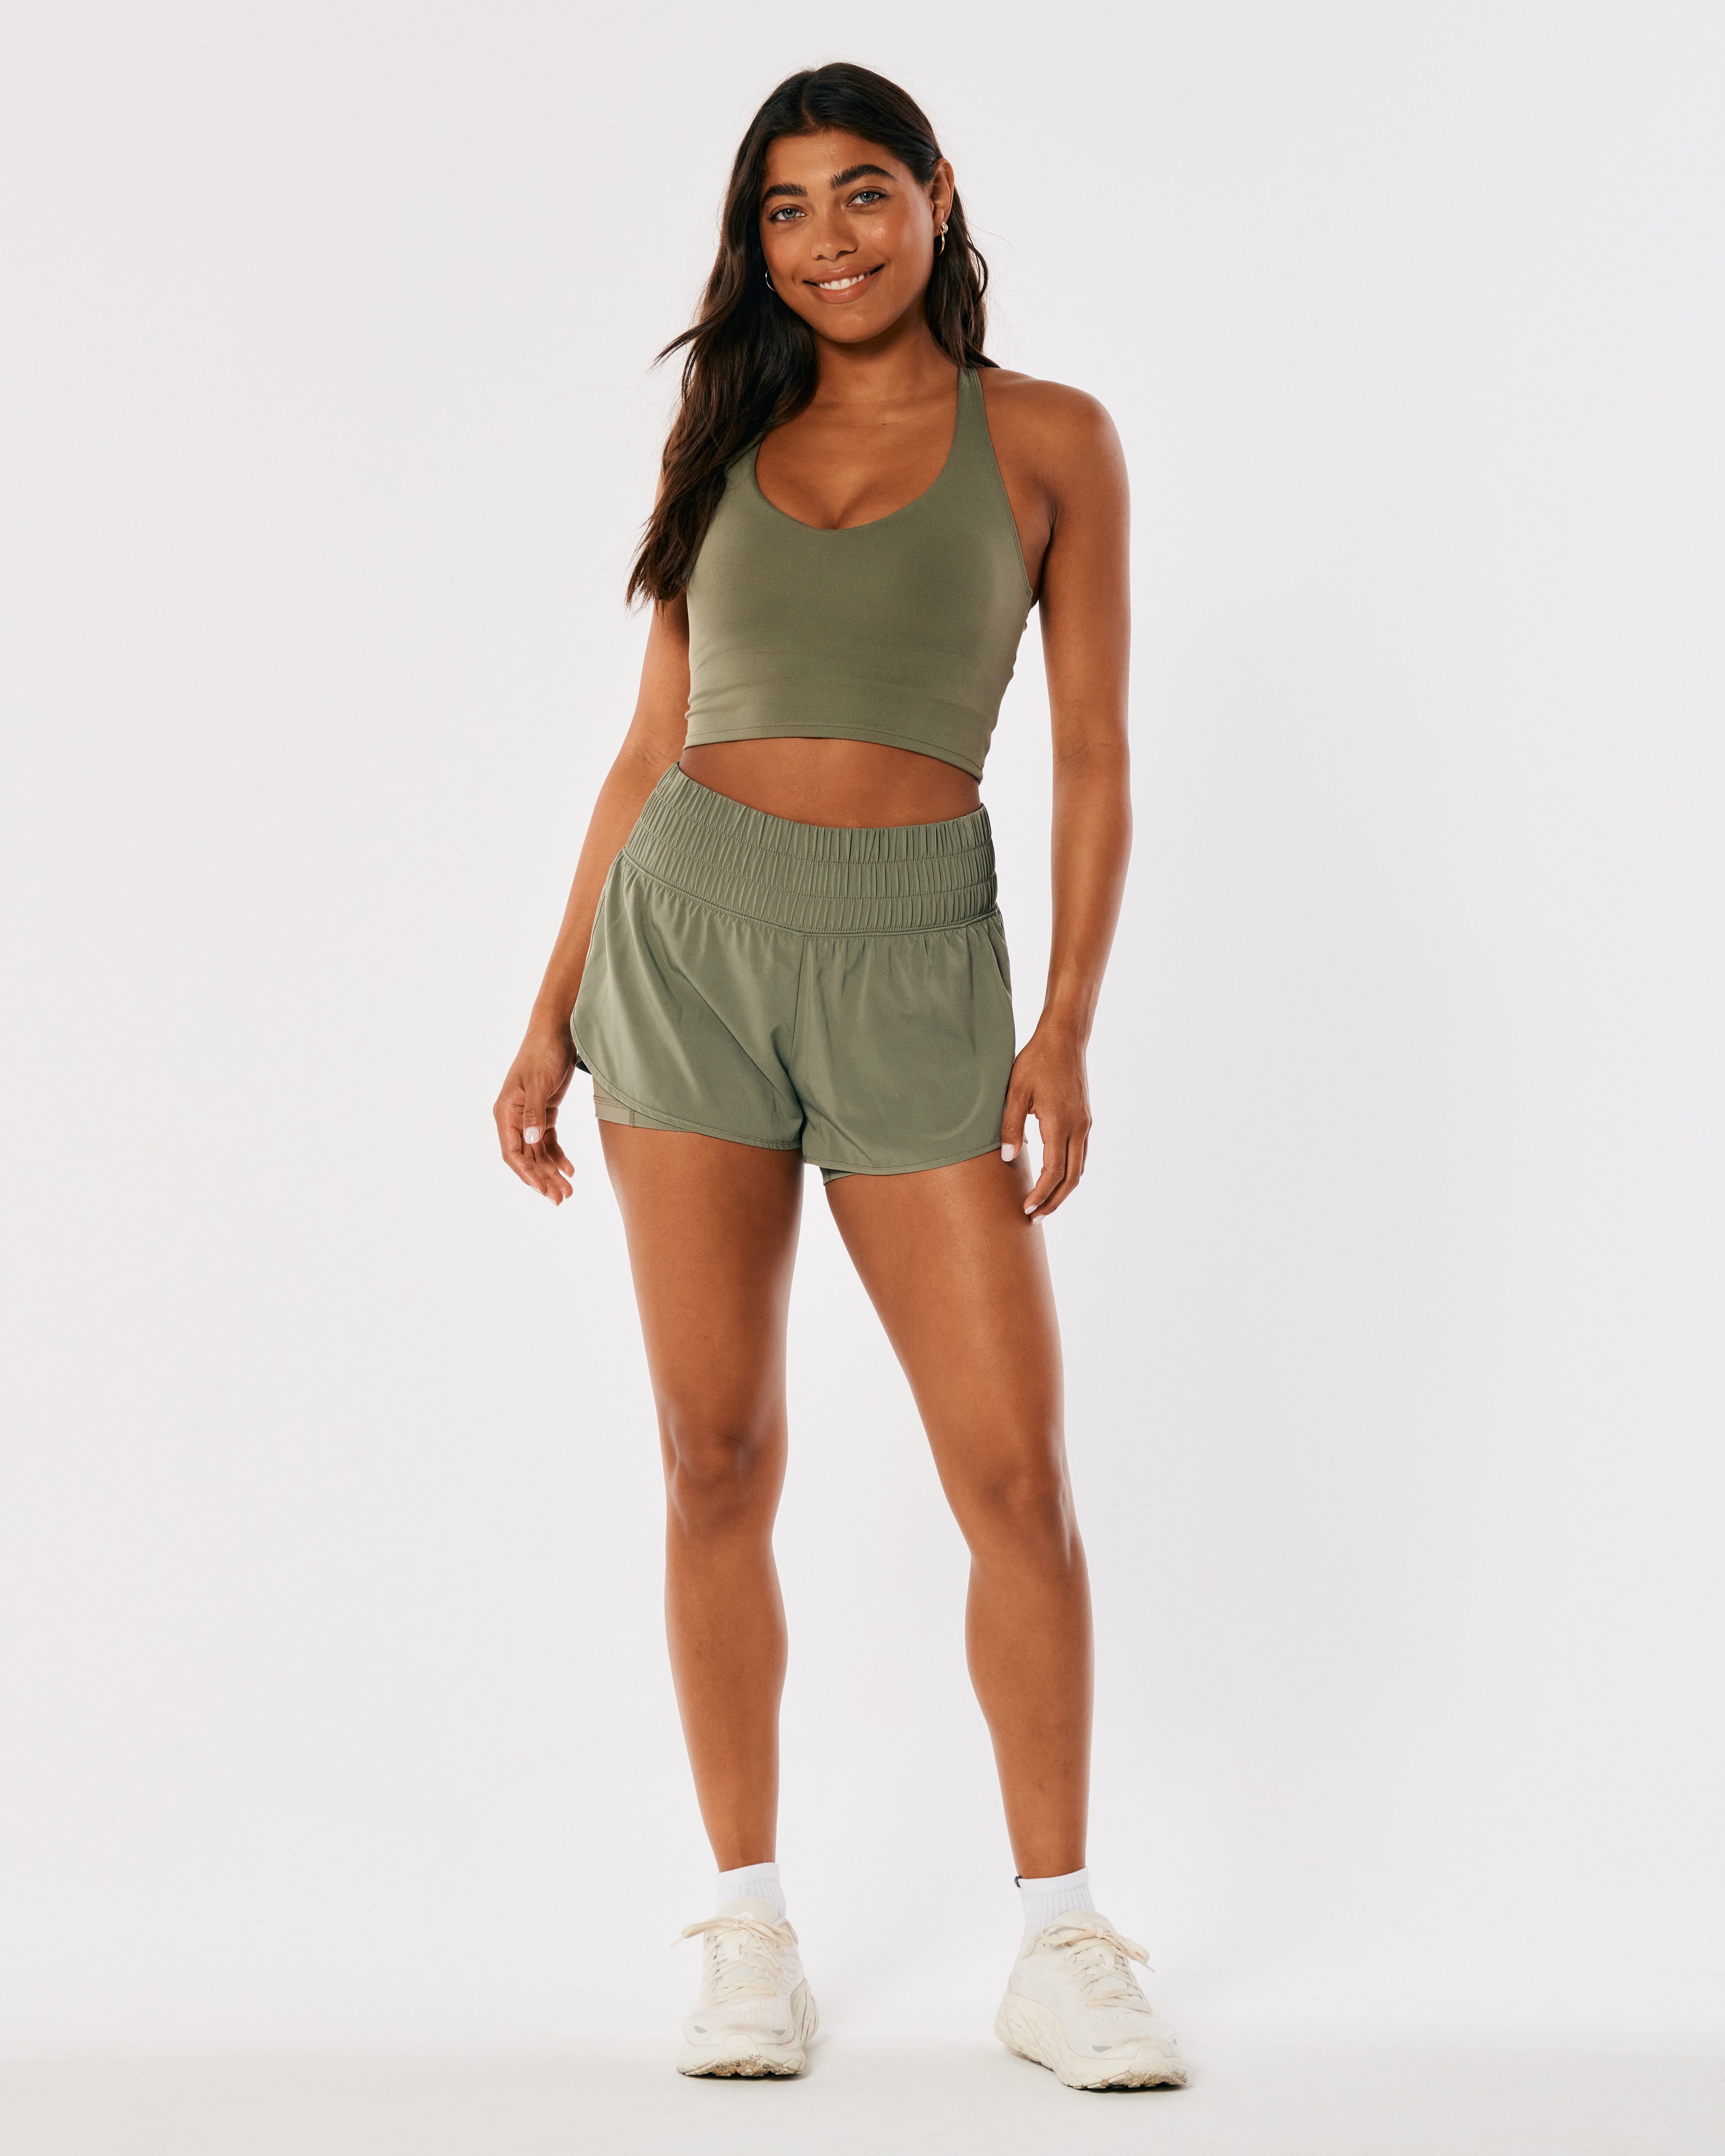 Hollister Gilly Hicks Go Recharge Strappy Longline Tank